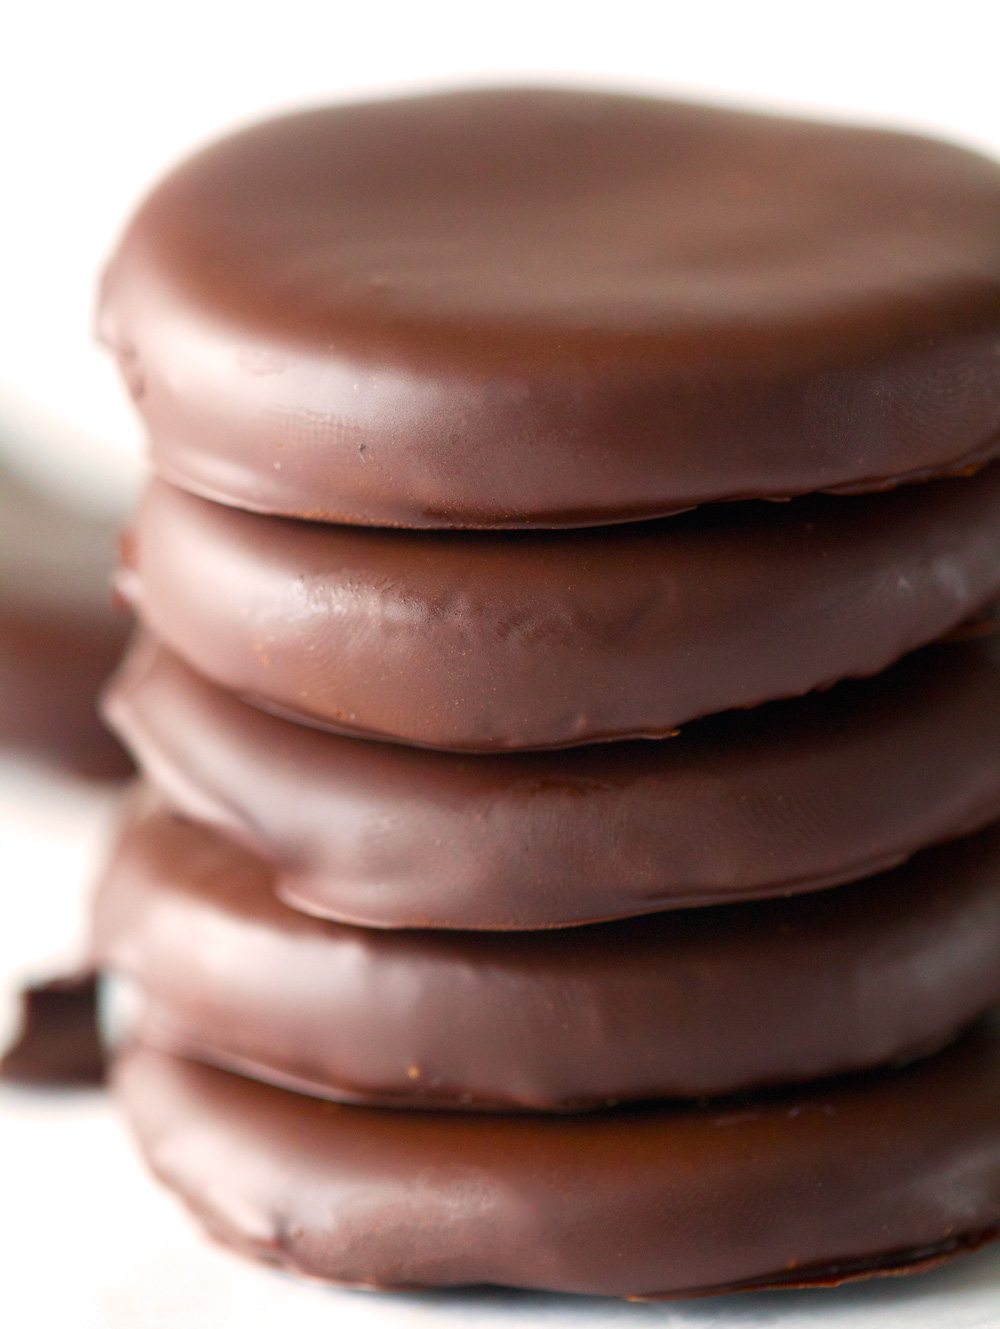 Homemade Peppermint Patties by Deliciously Yum!